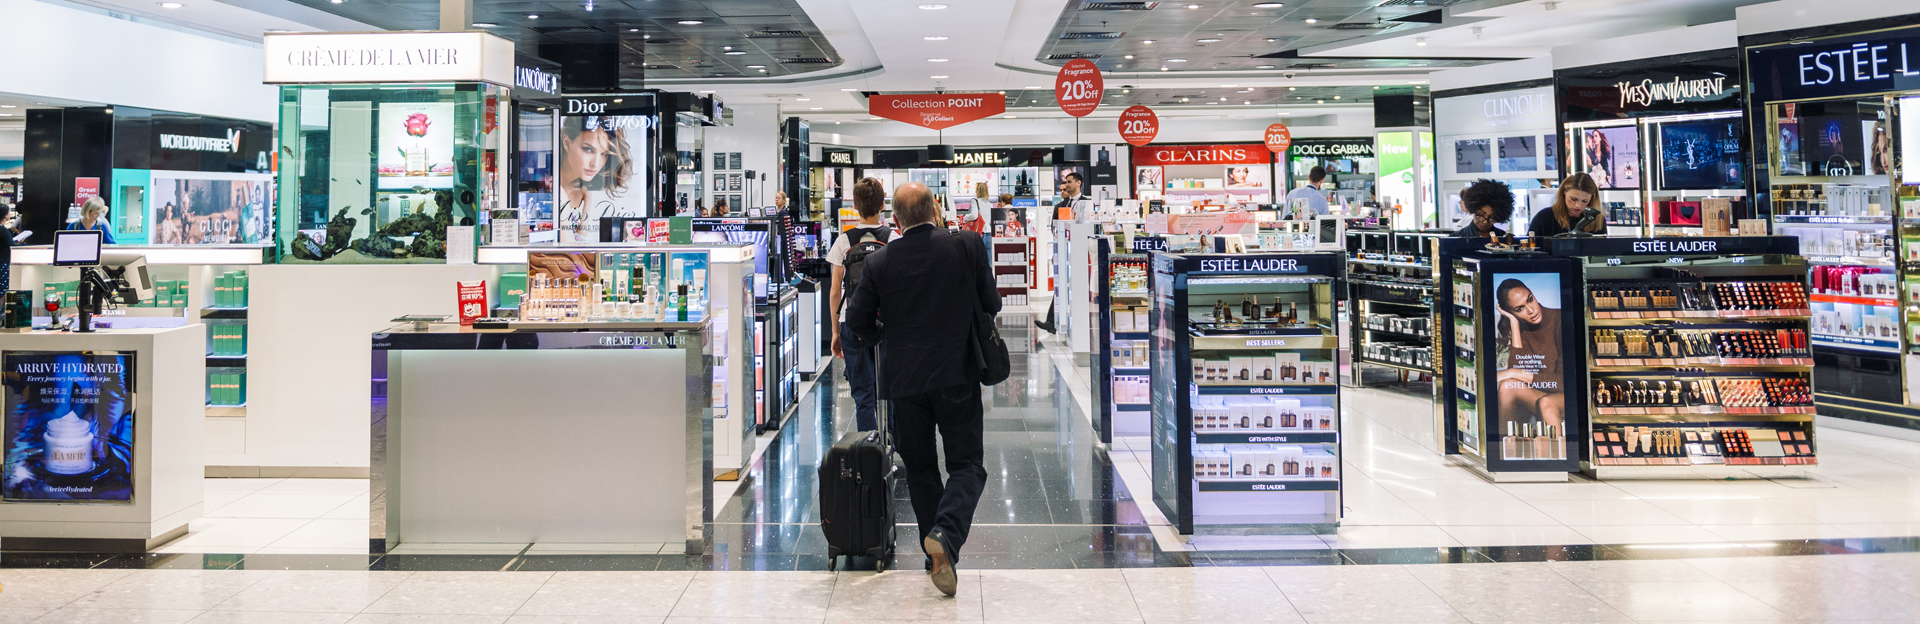 HEATHROW AIRPORT, TERMINAL 3, Departure Hall Zones A-G, Duty Free Shops, Gates